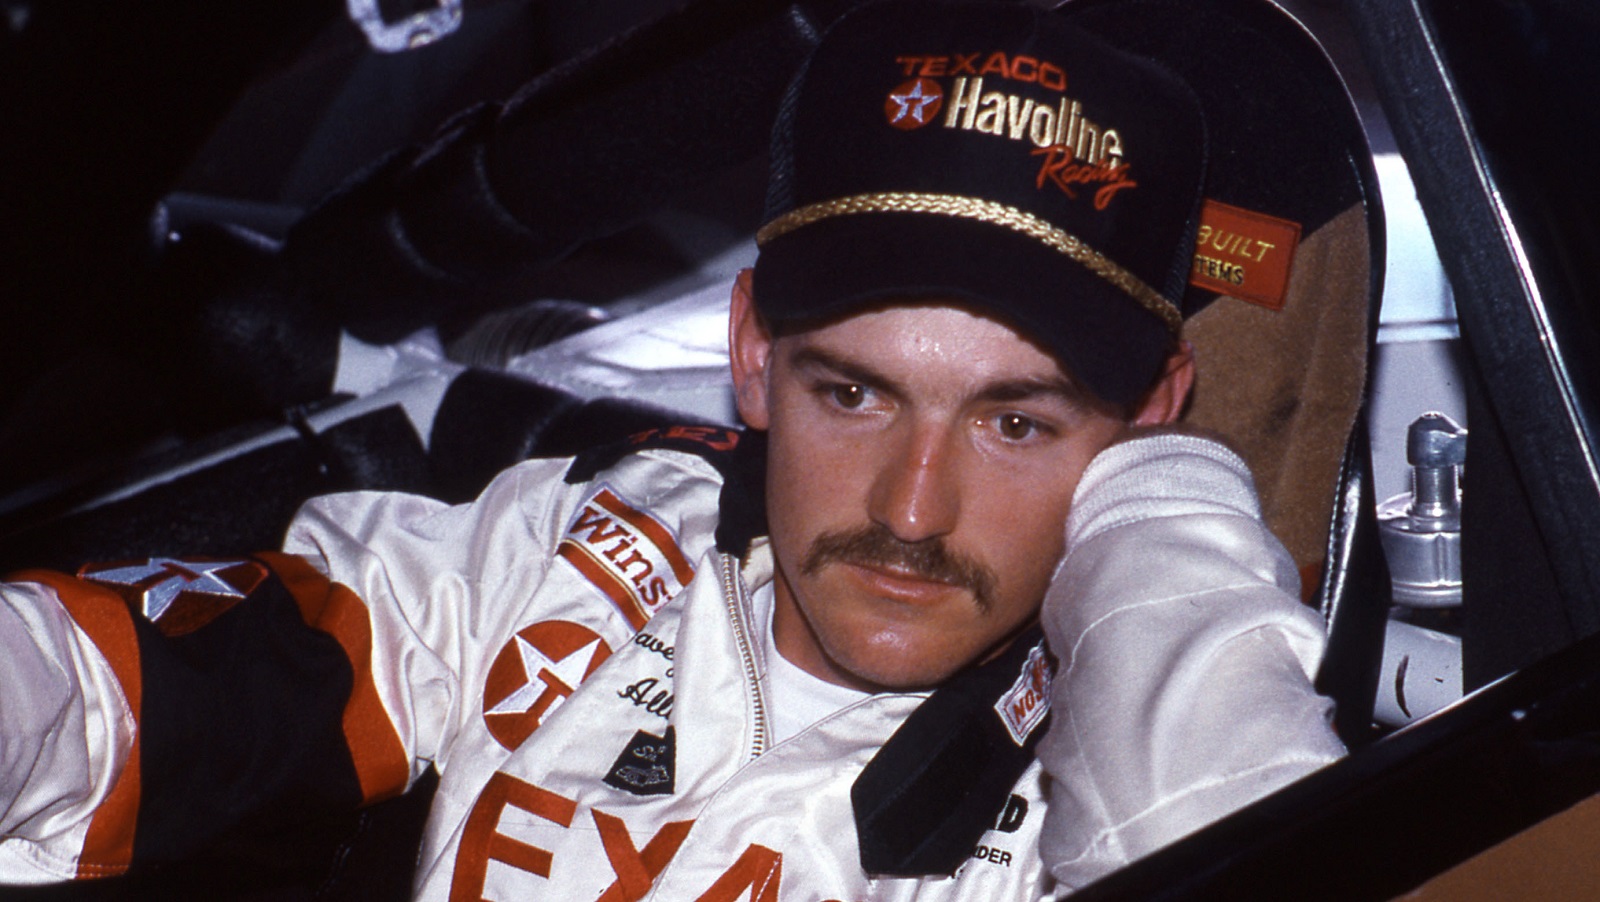 Davey Allison prior to a 1991 NASCAR Cup Series race for Robert Yates Racing,